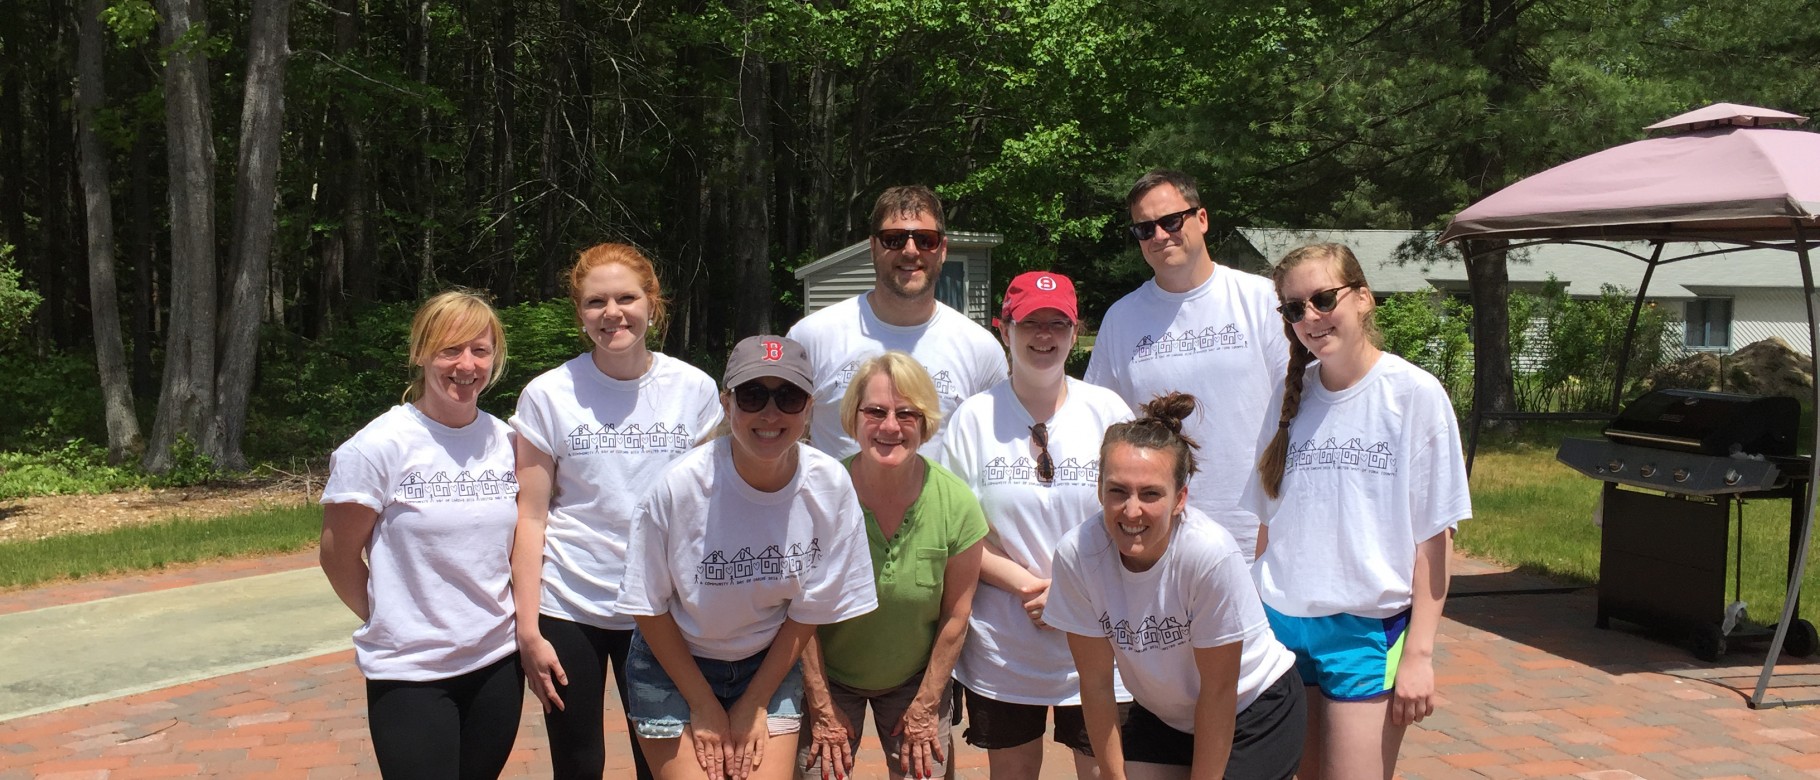 The staff of the Office of Graduate and Professional Admissions recently volunteered as part of the United Way's Day of Caring. 